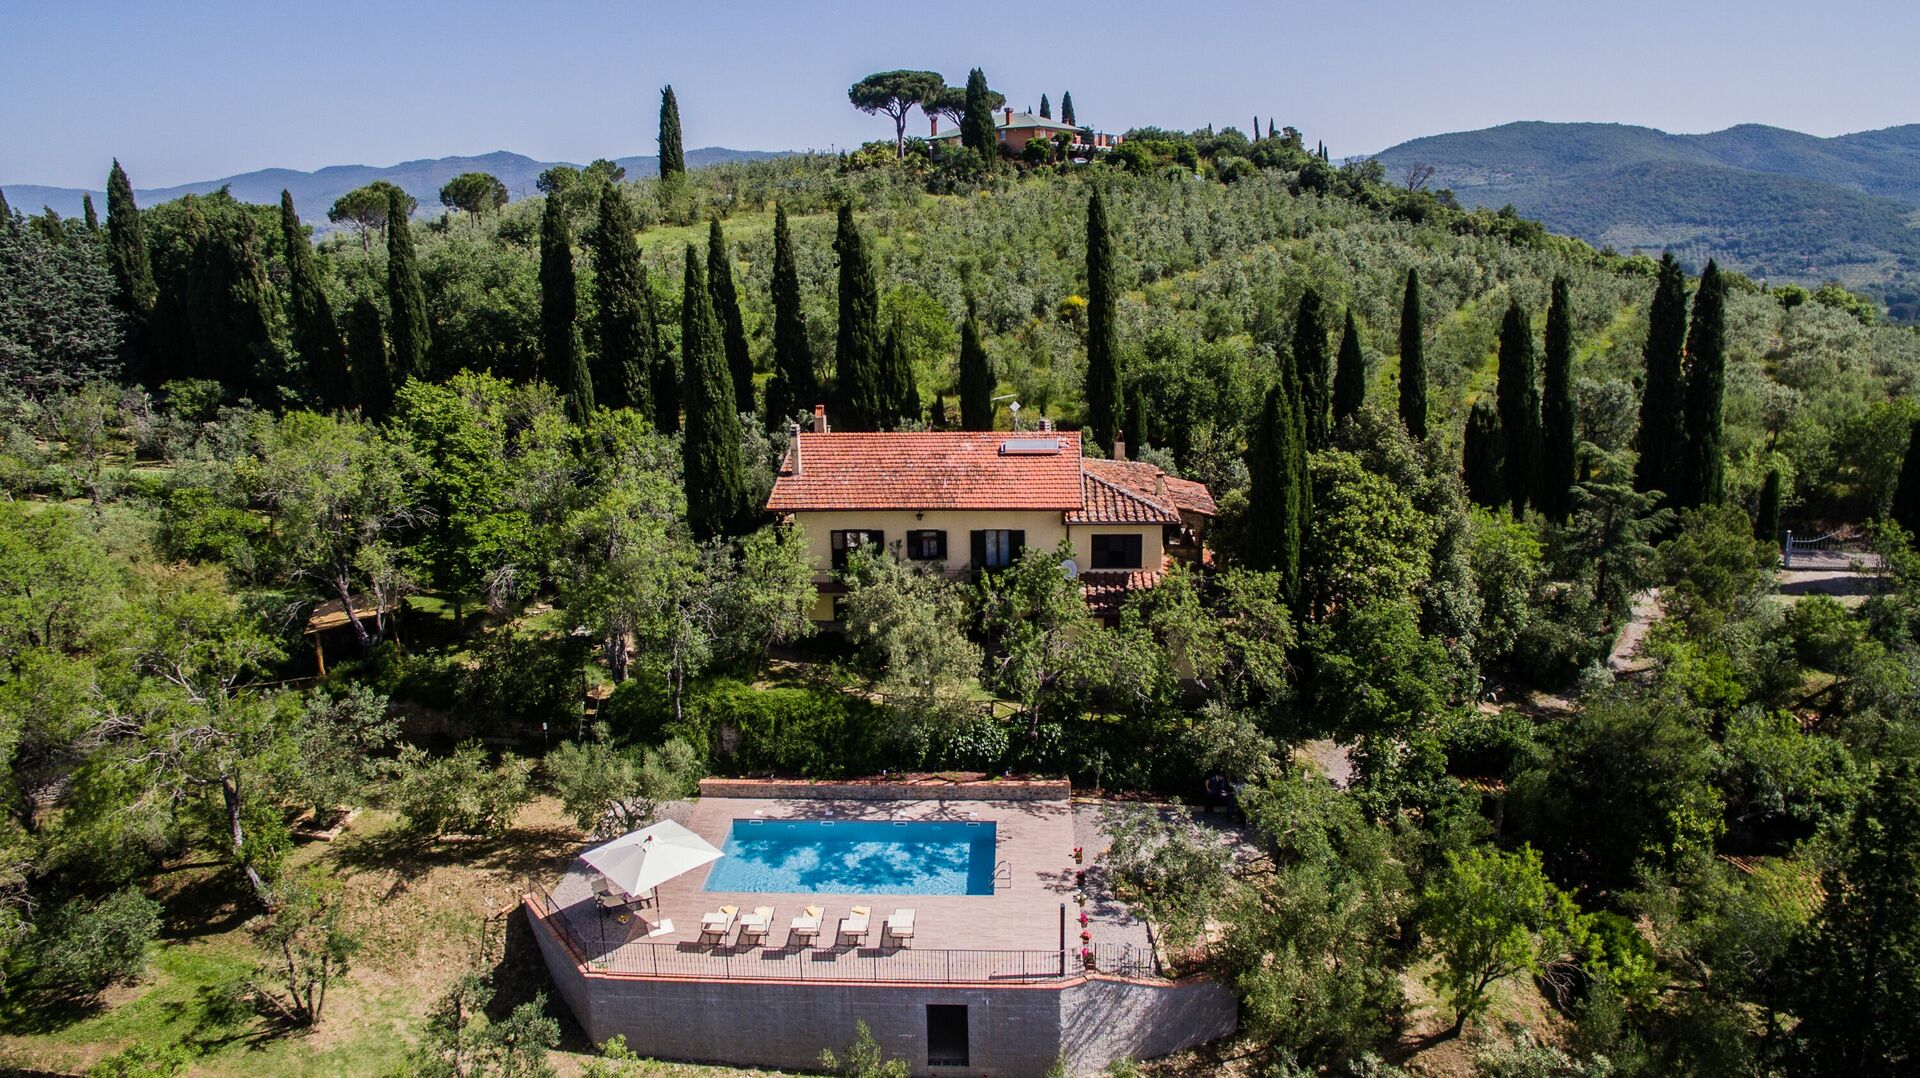 Holiday villa in Tuscany with terrace, parasol and deckchairs overlooking vineyards